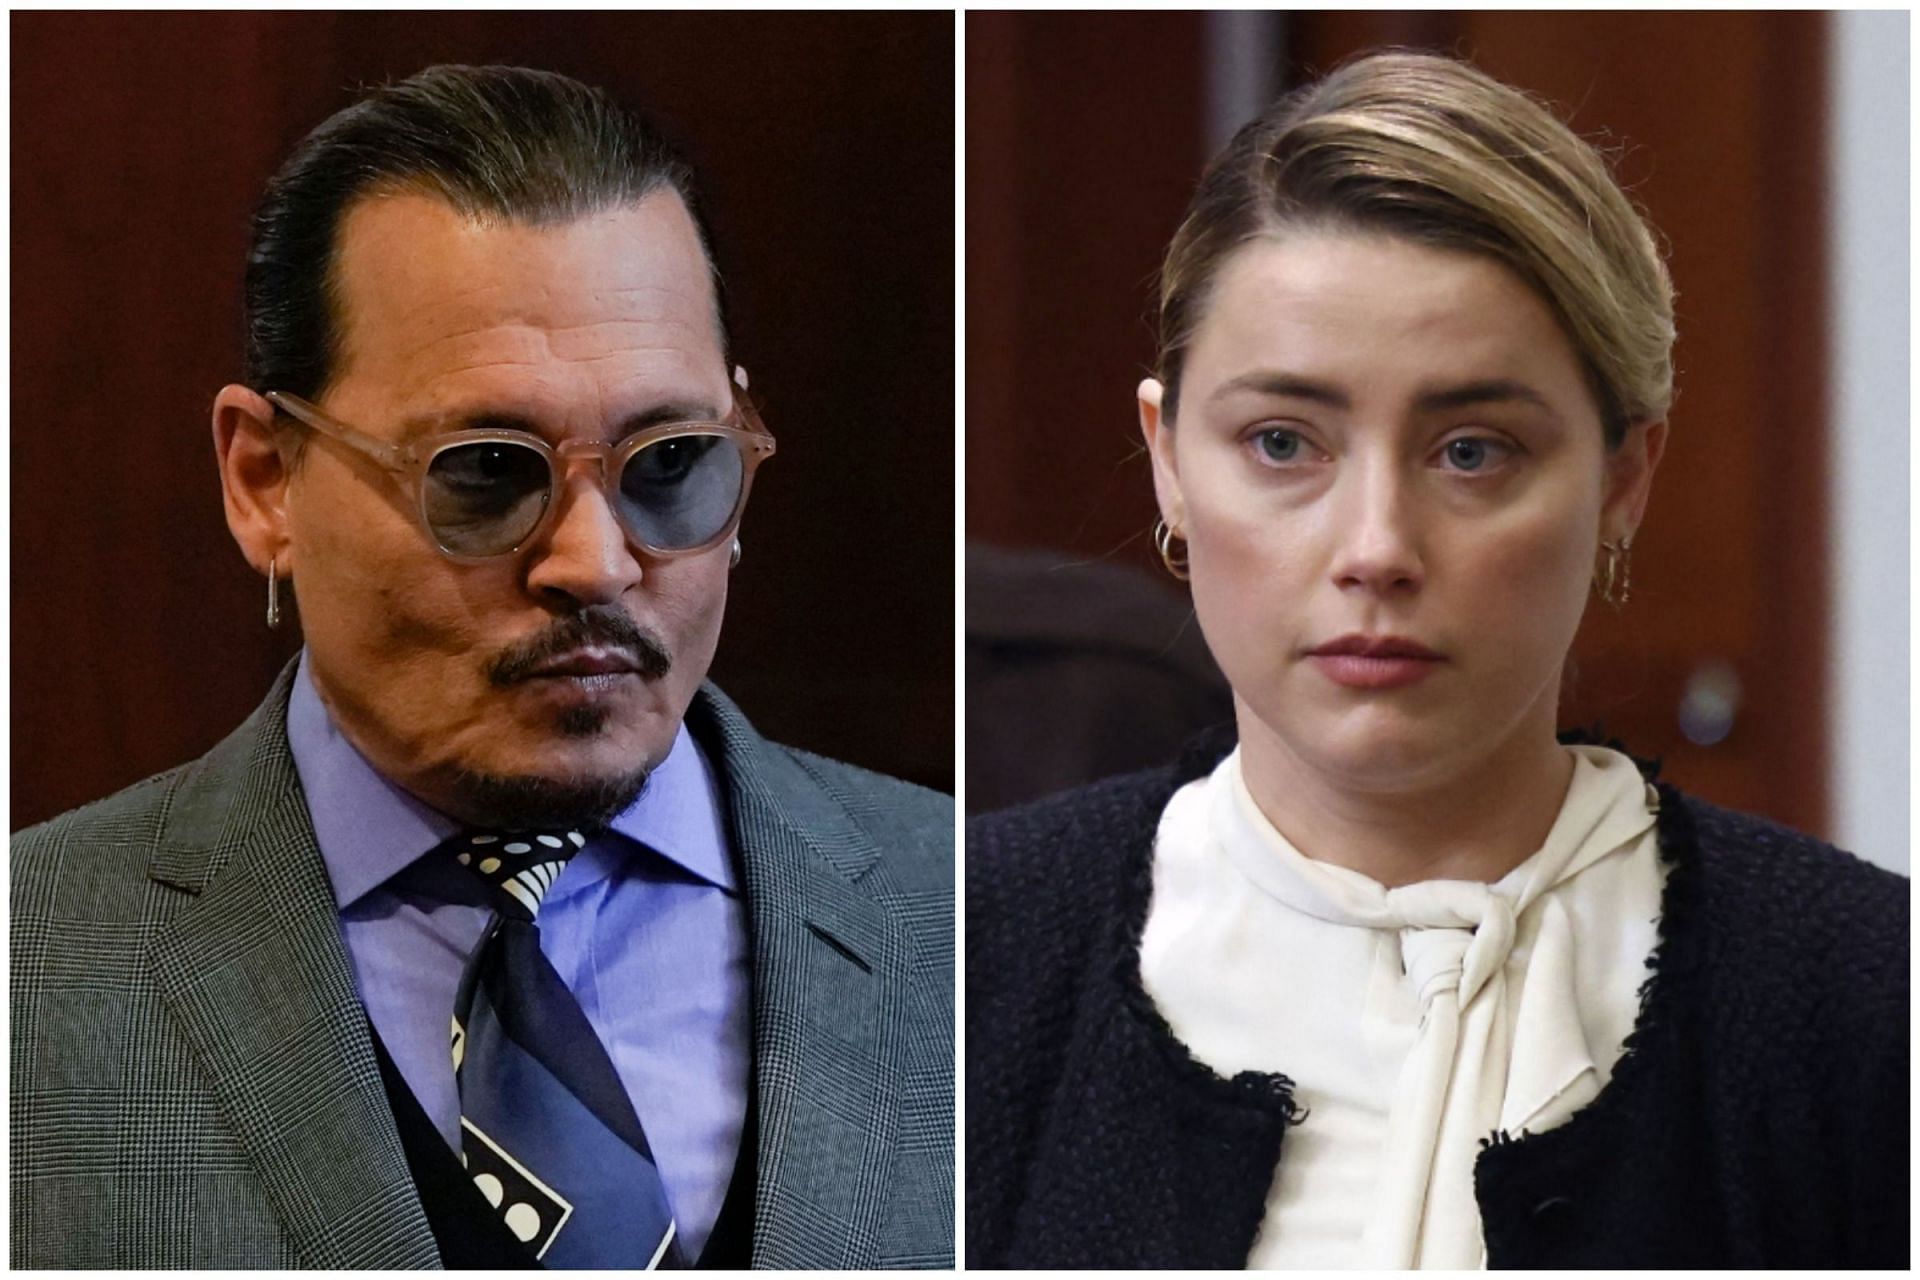 Johnny Depp and Amber Heard react to the jury&rsquo;s verdict (Image via Getty Images)